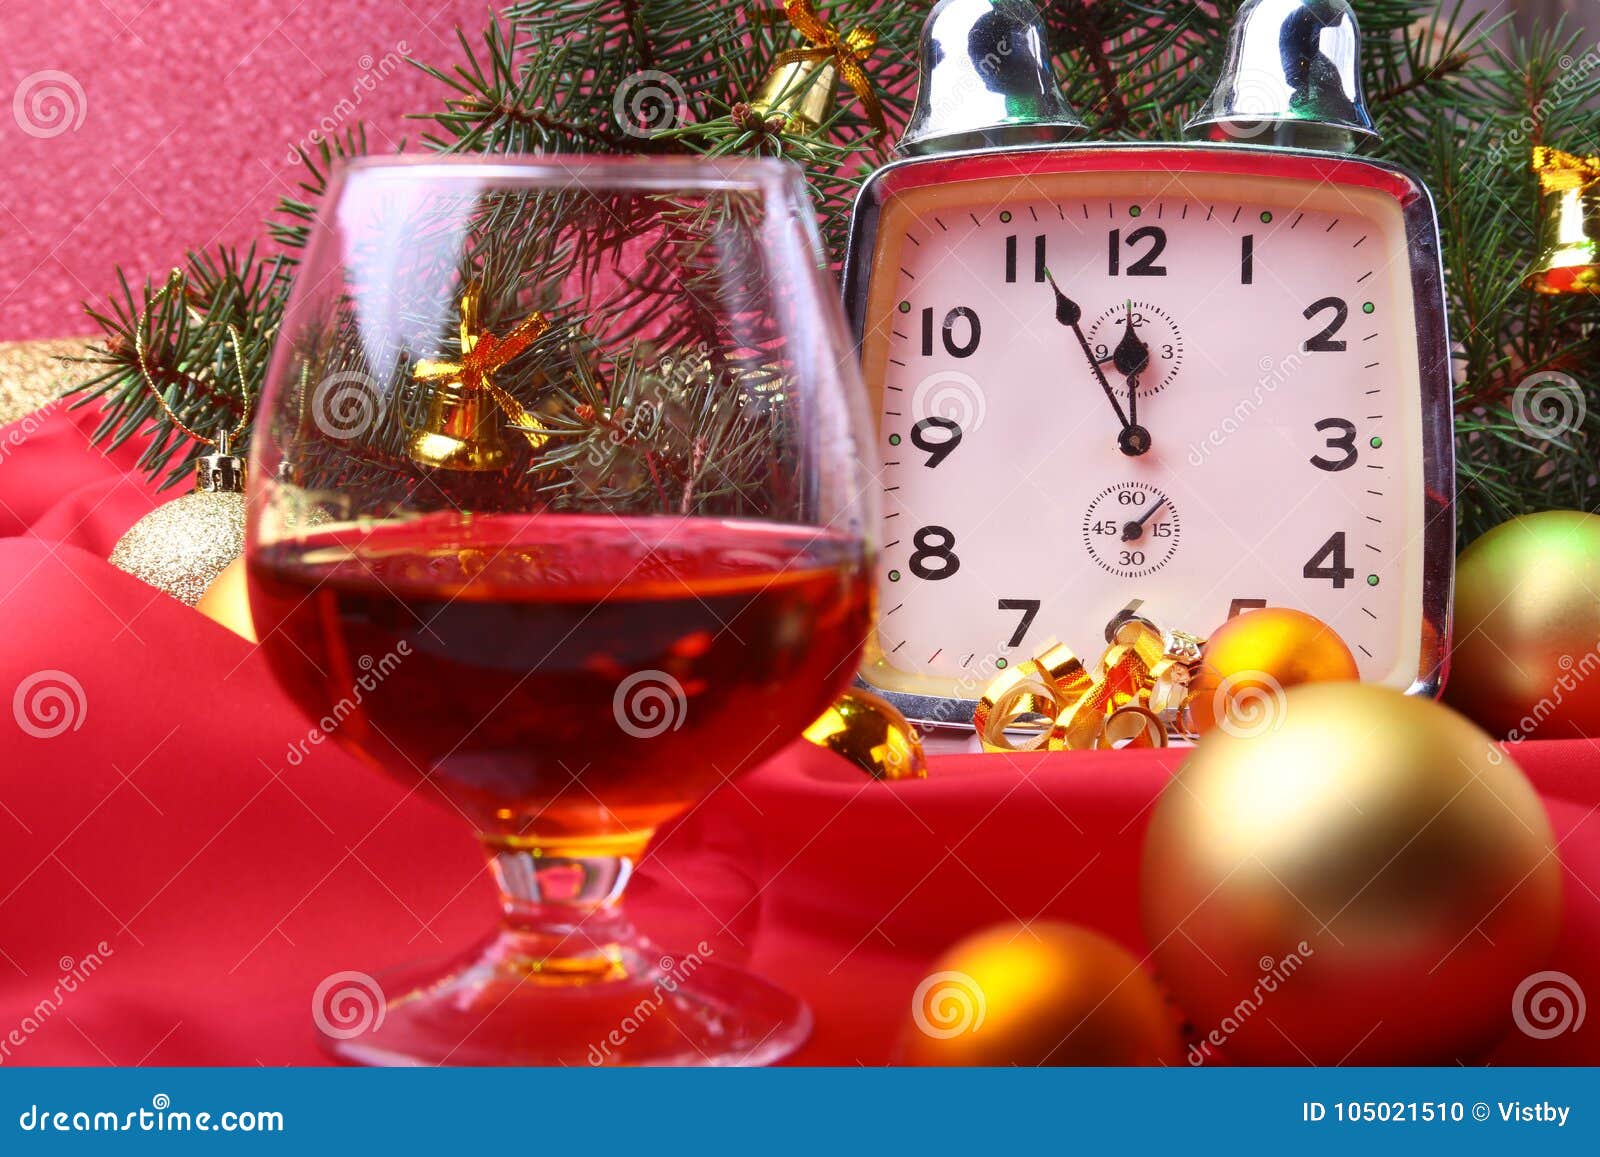 https://thumbs.dreamstime.com/z/christmas-clock-glass-cognac-whisky-new-year-s-decoration-gift-boxes-christmas-balls-tree-christmas-clock-105021510.jpg